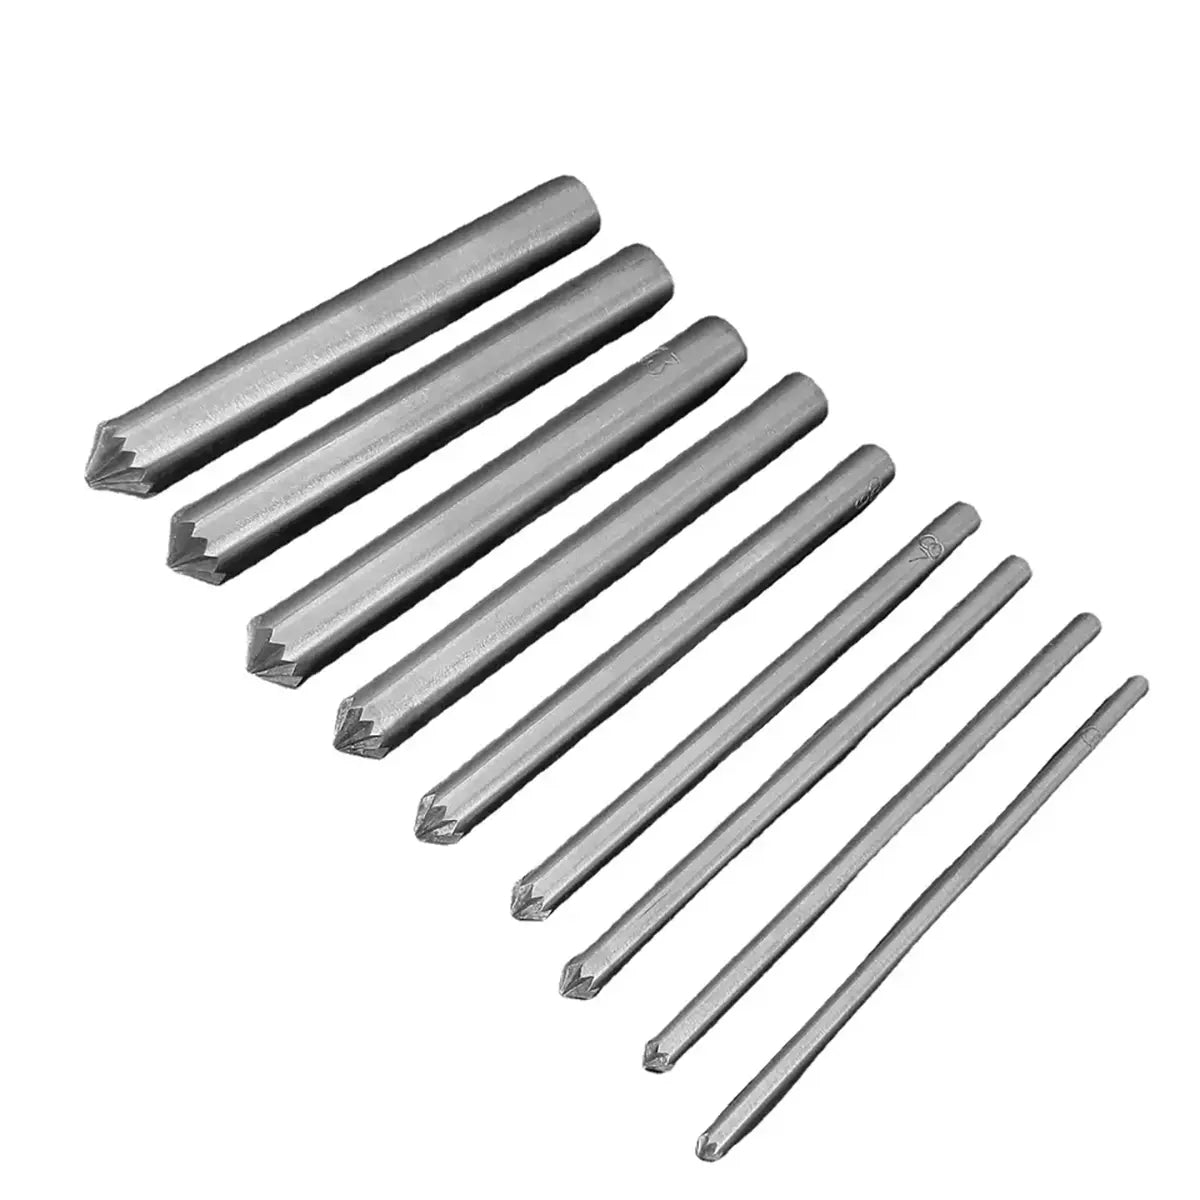 Flowering Round Rivet Punches